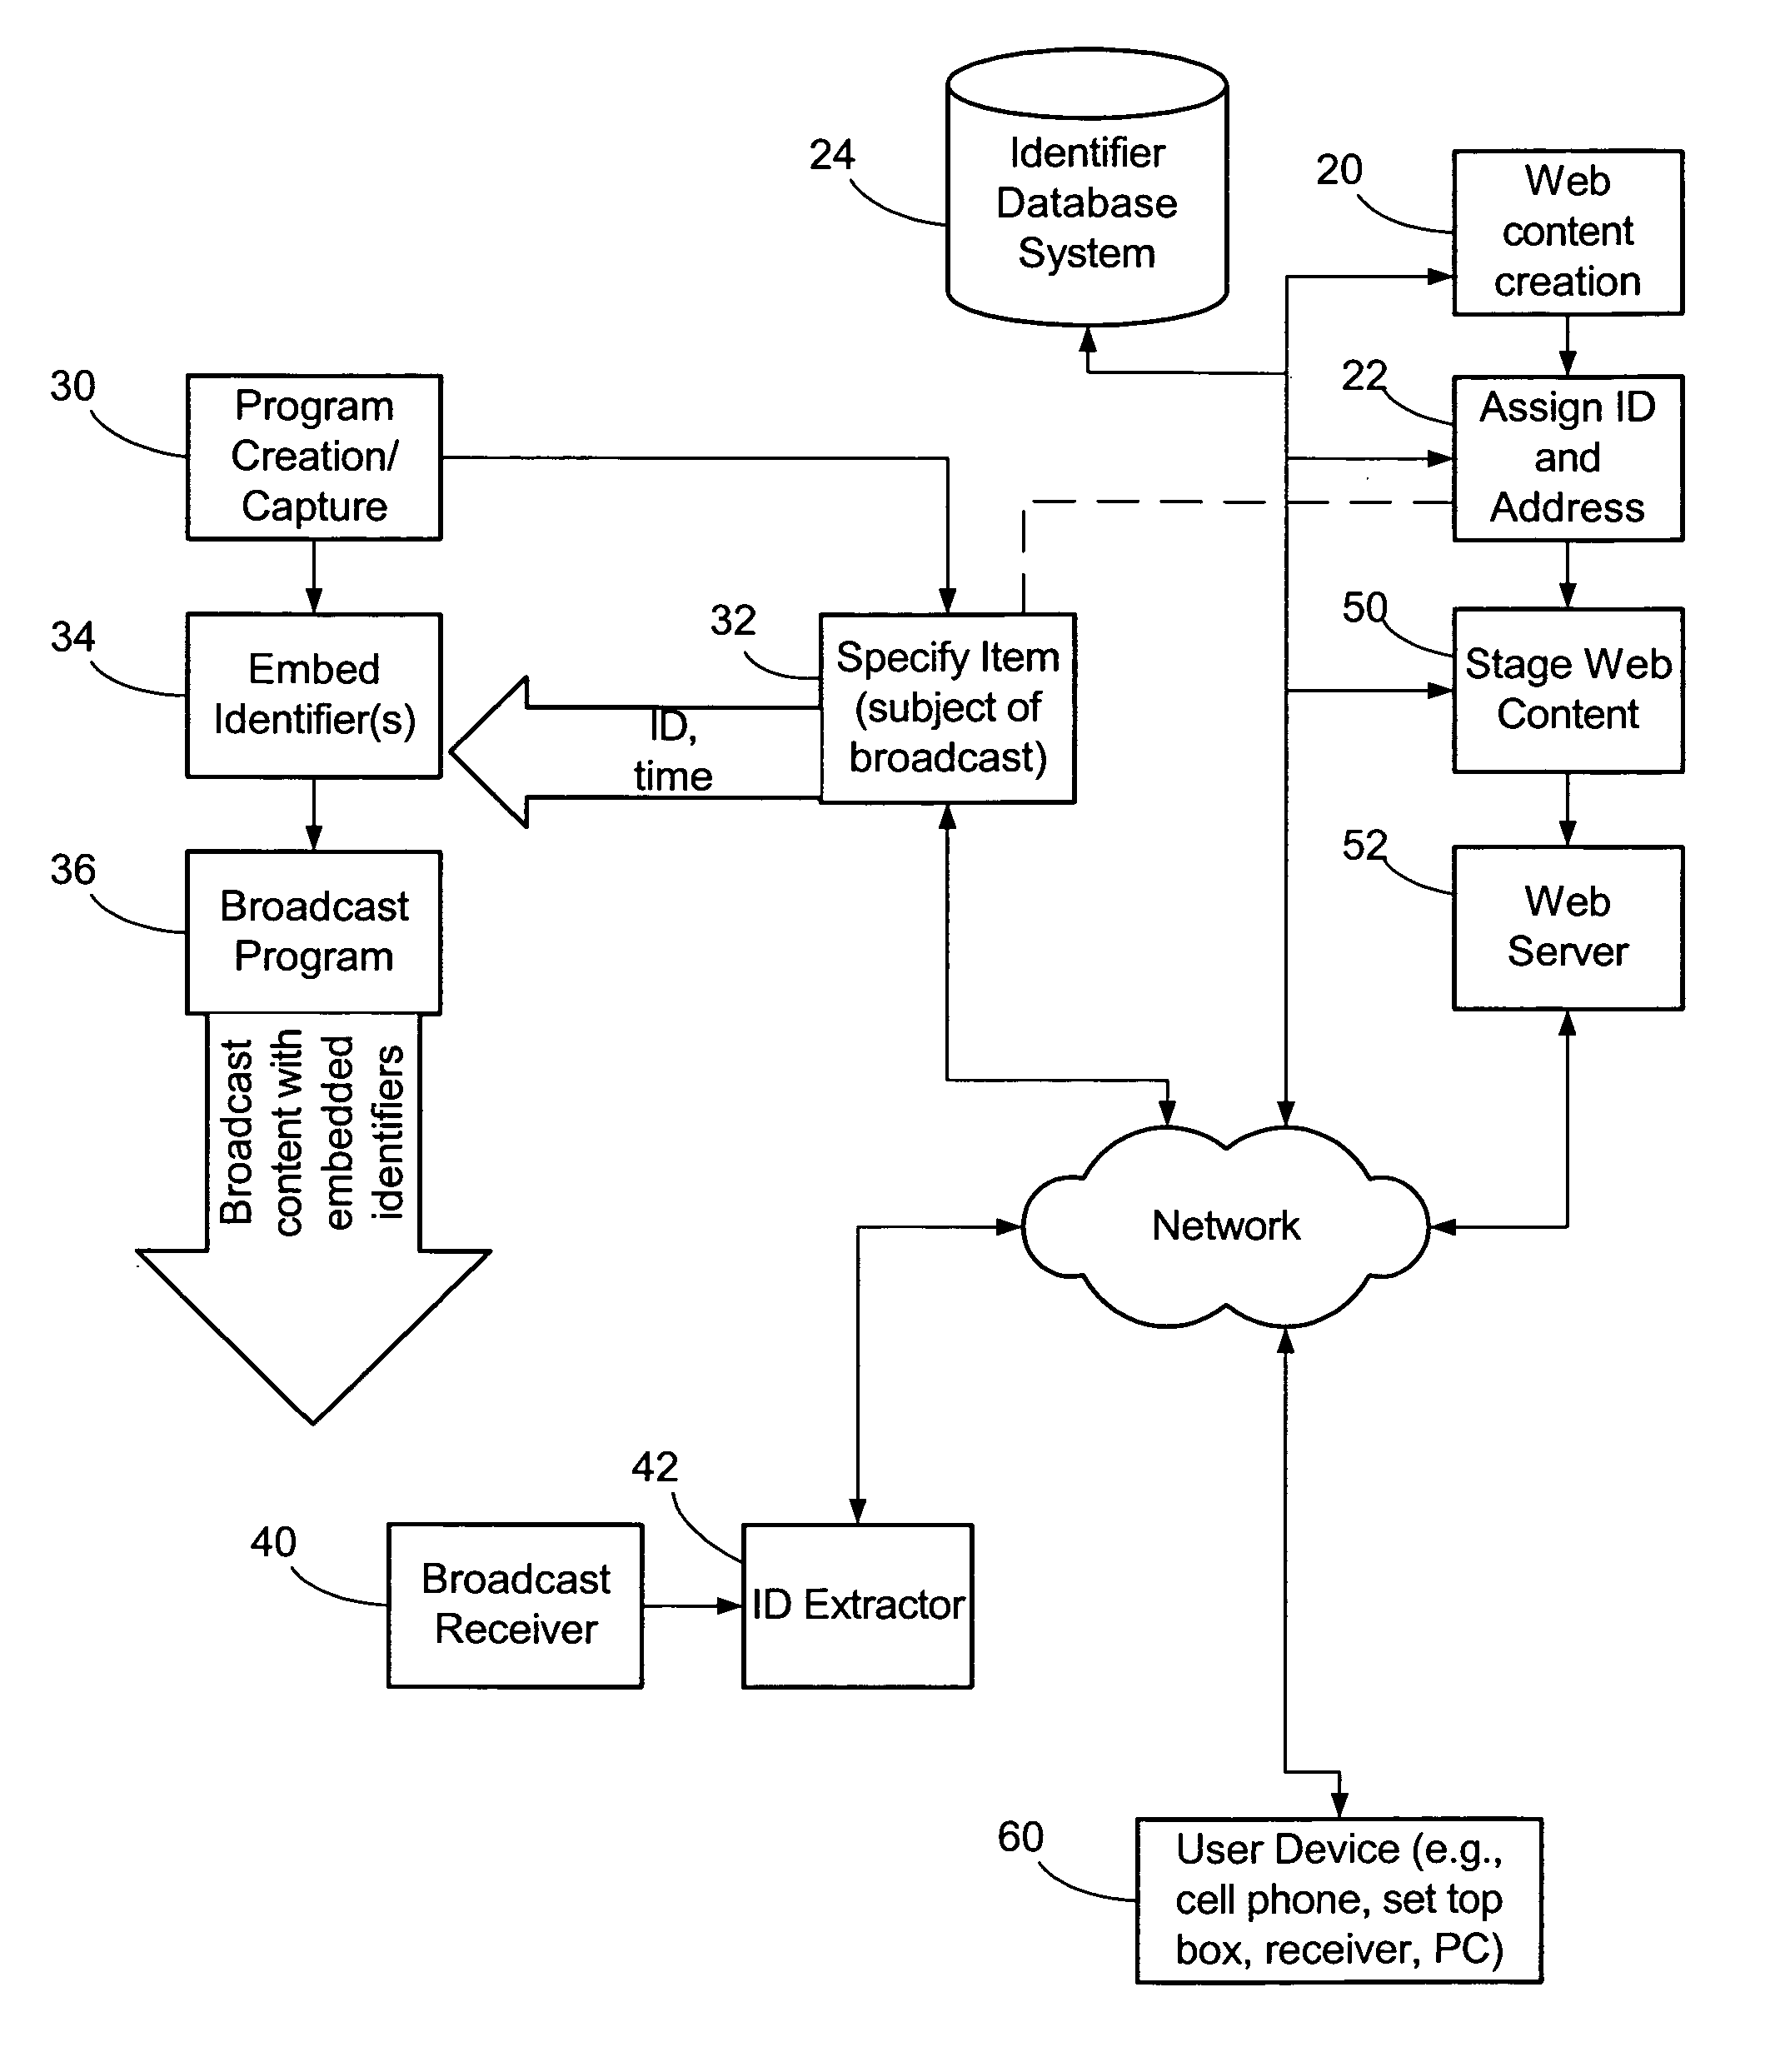 Synchronizing broadcast content with corresponding network content